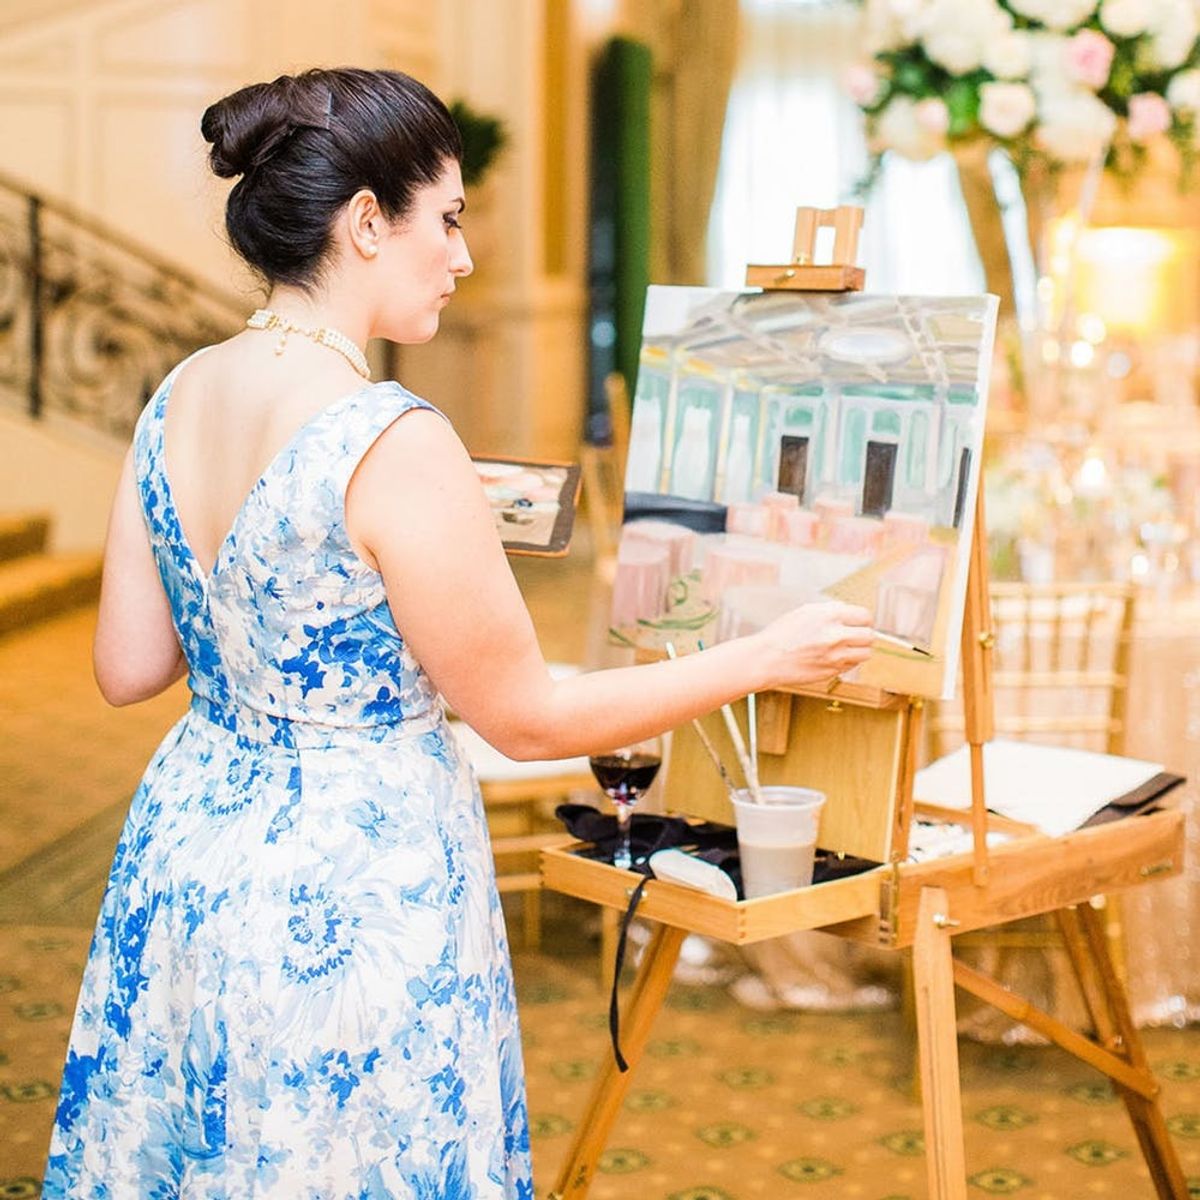 Why Live Painting Could Be the Next Big Wedding Trend